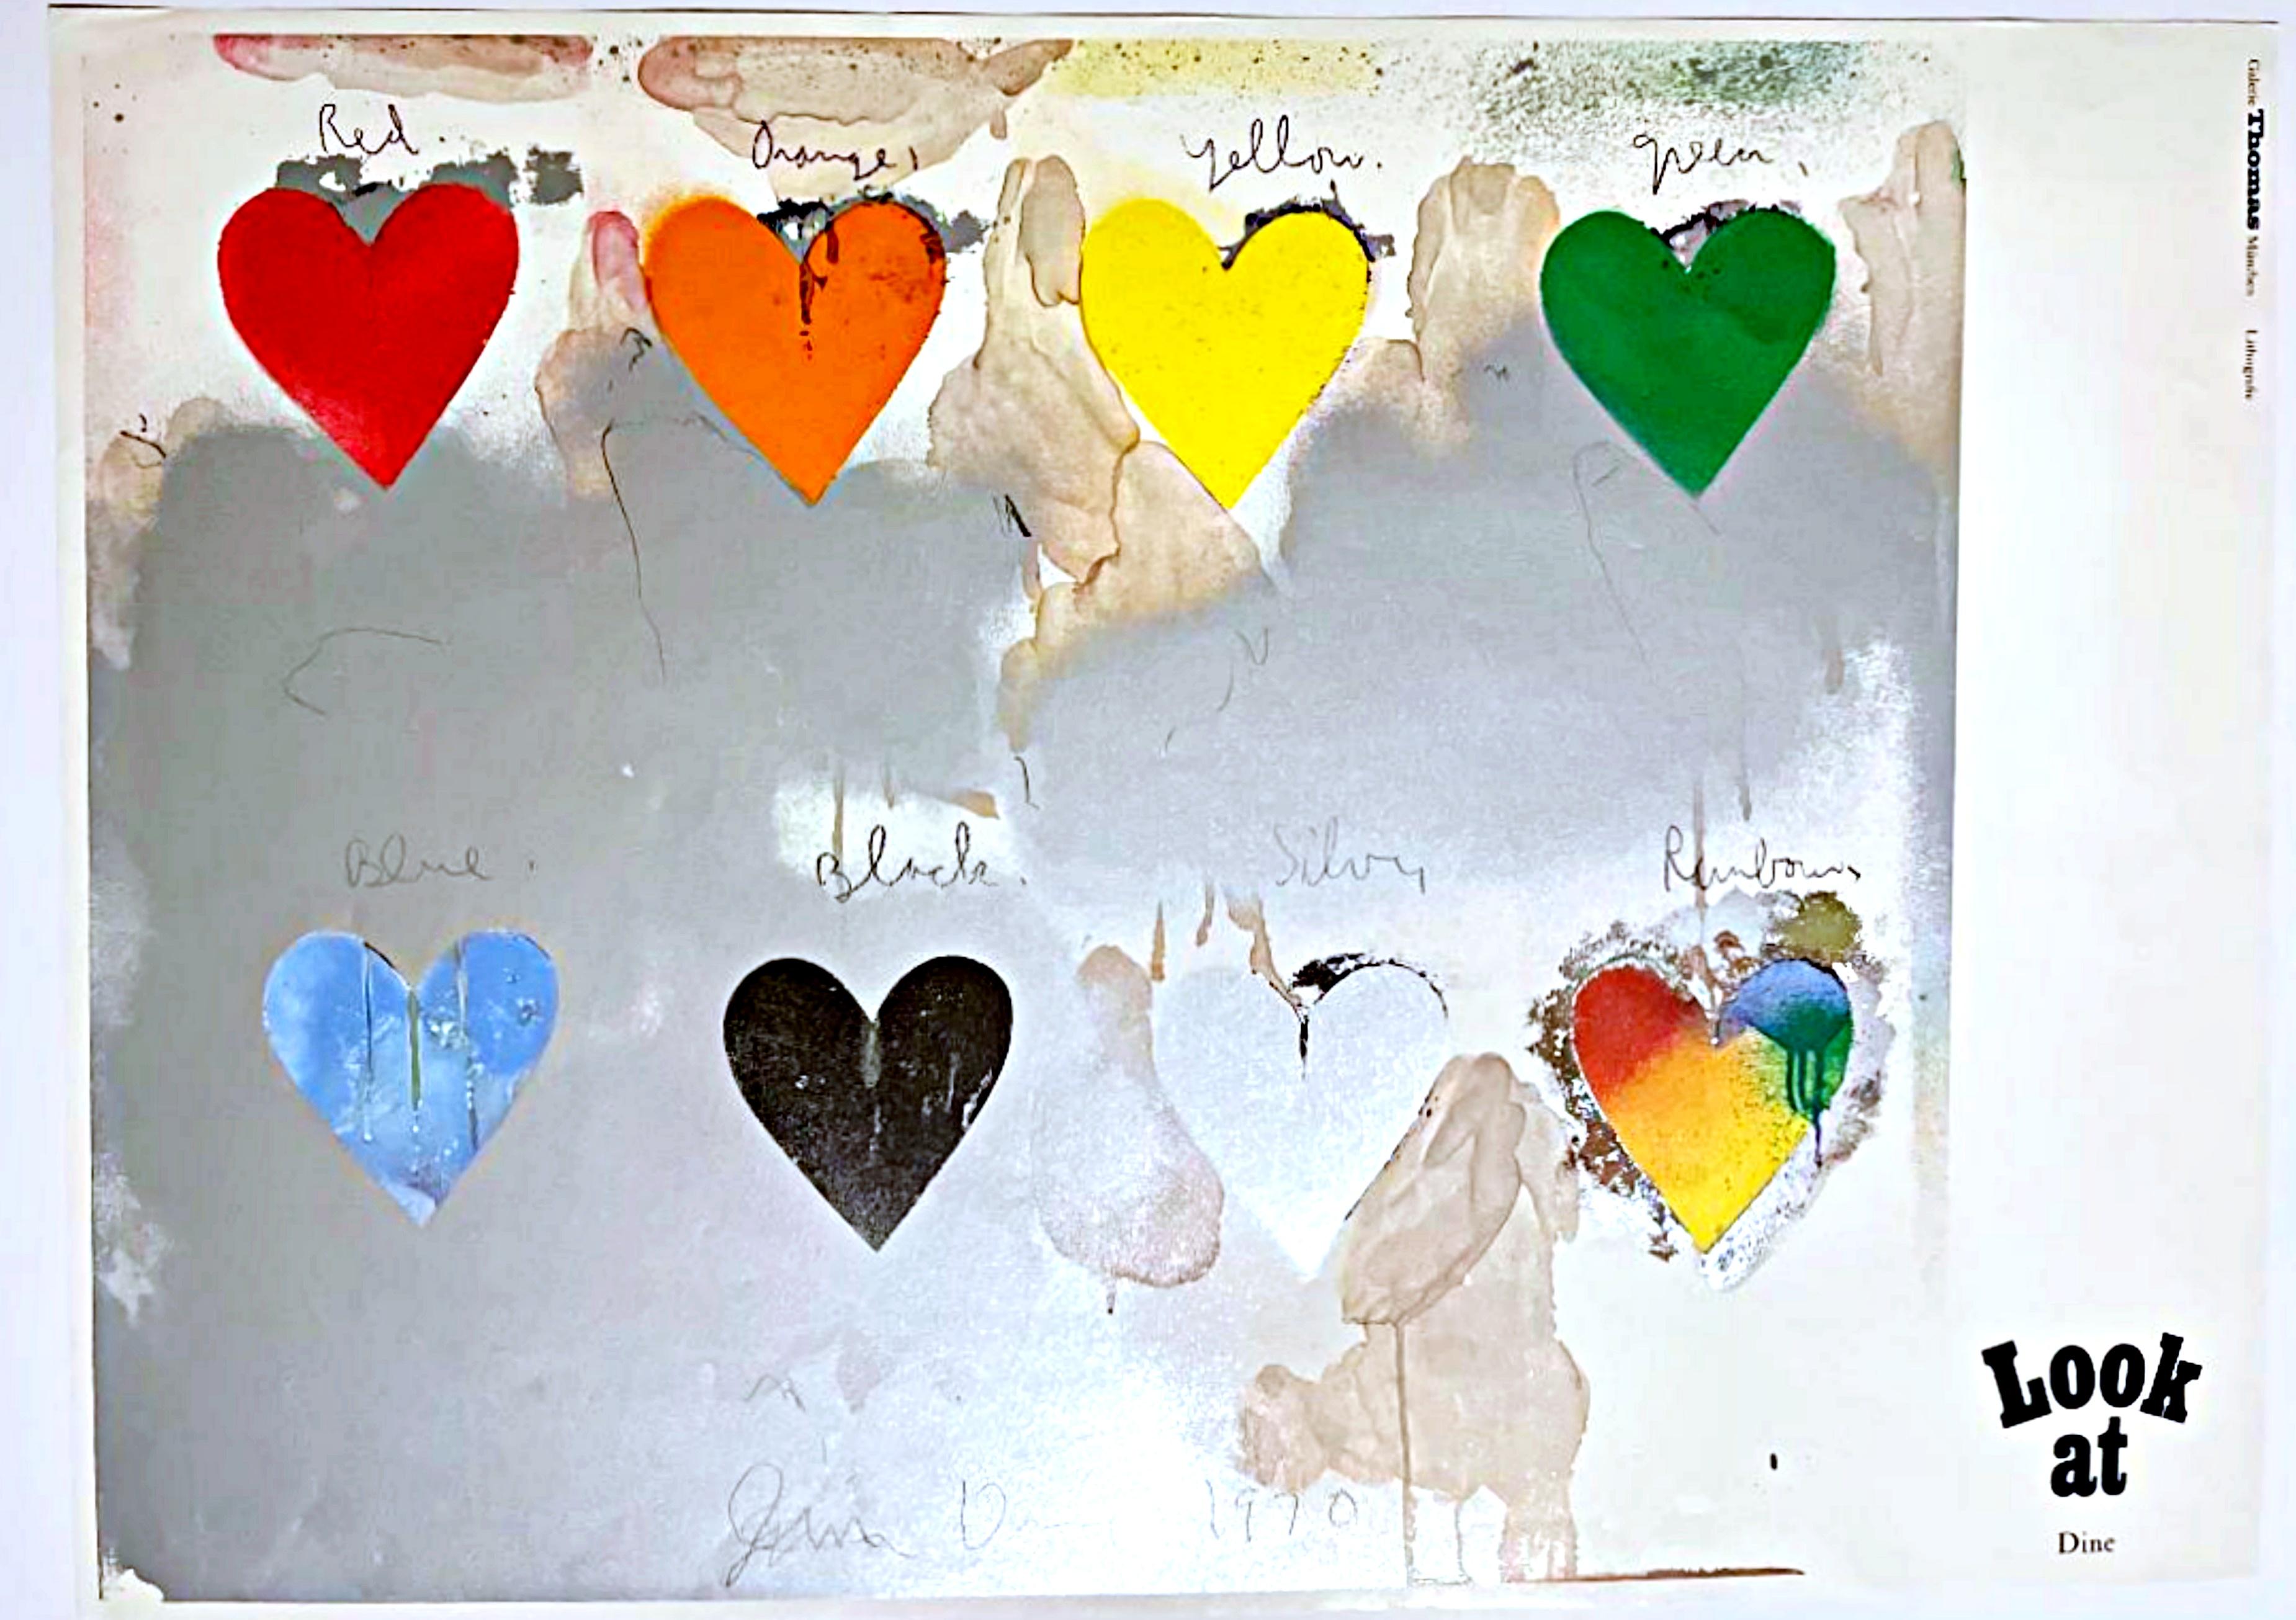 Jim Dine Figurative Print - 8 Hearts / Look, Lt. Ed Off-set Lithograph with metallic paper collage overlay